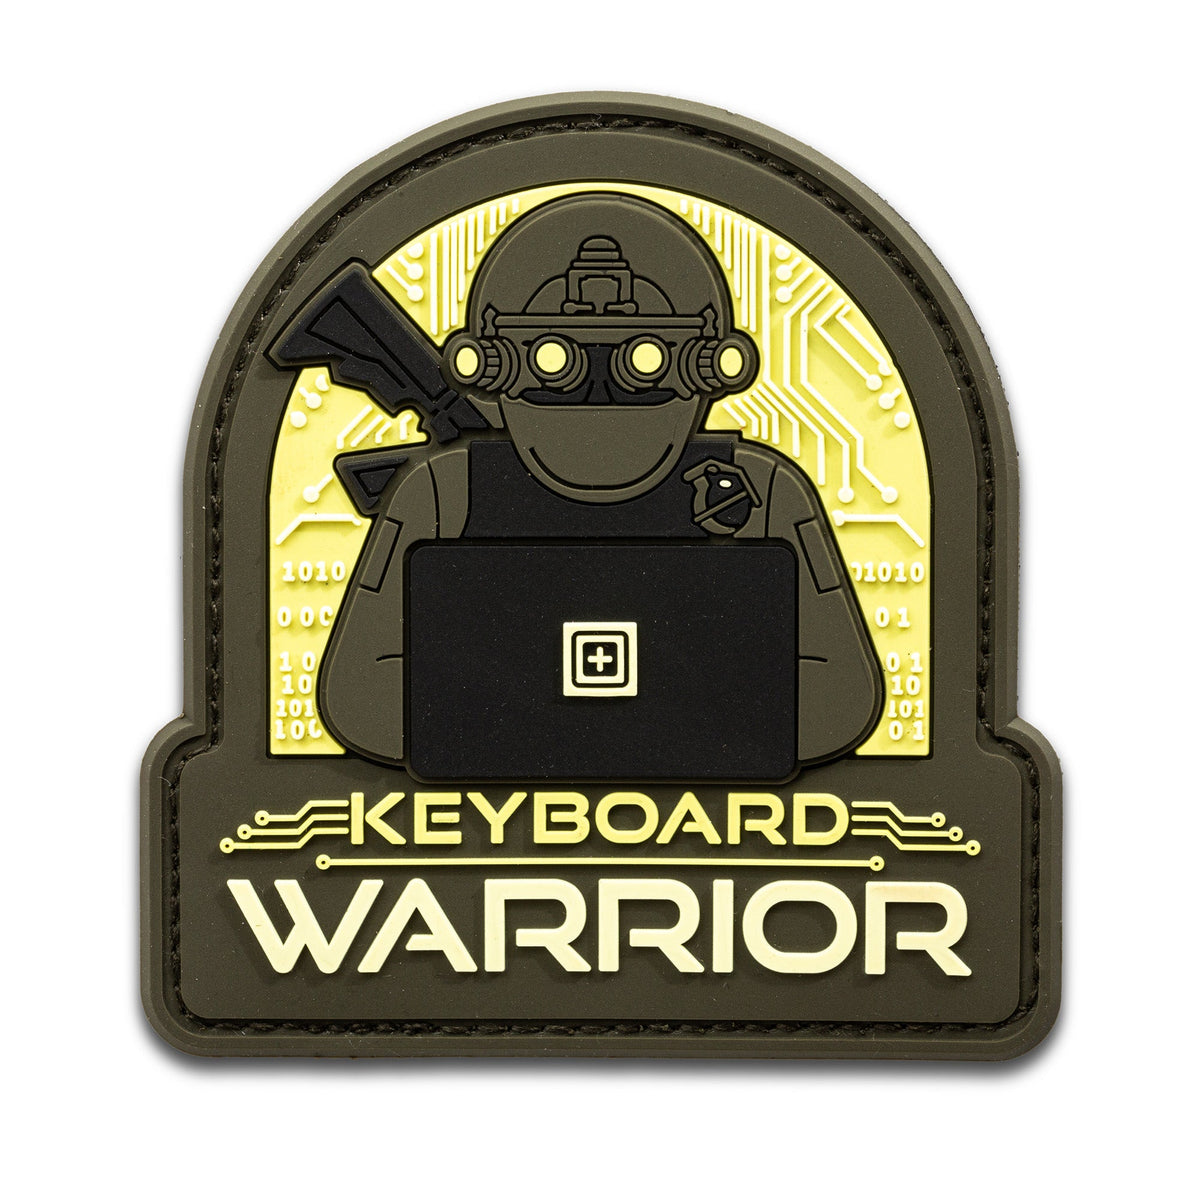 5.11 Tactical Keyboard Warrior Patch Accessories 5.11 Tactical Tactical Gear Supplier Tactical Distributors Australia